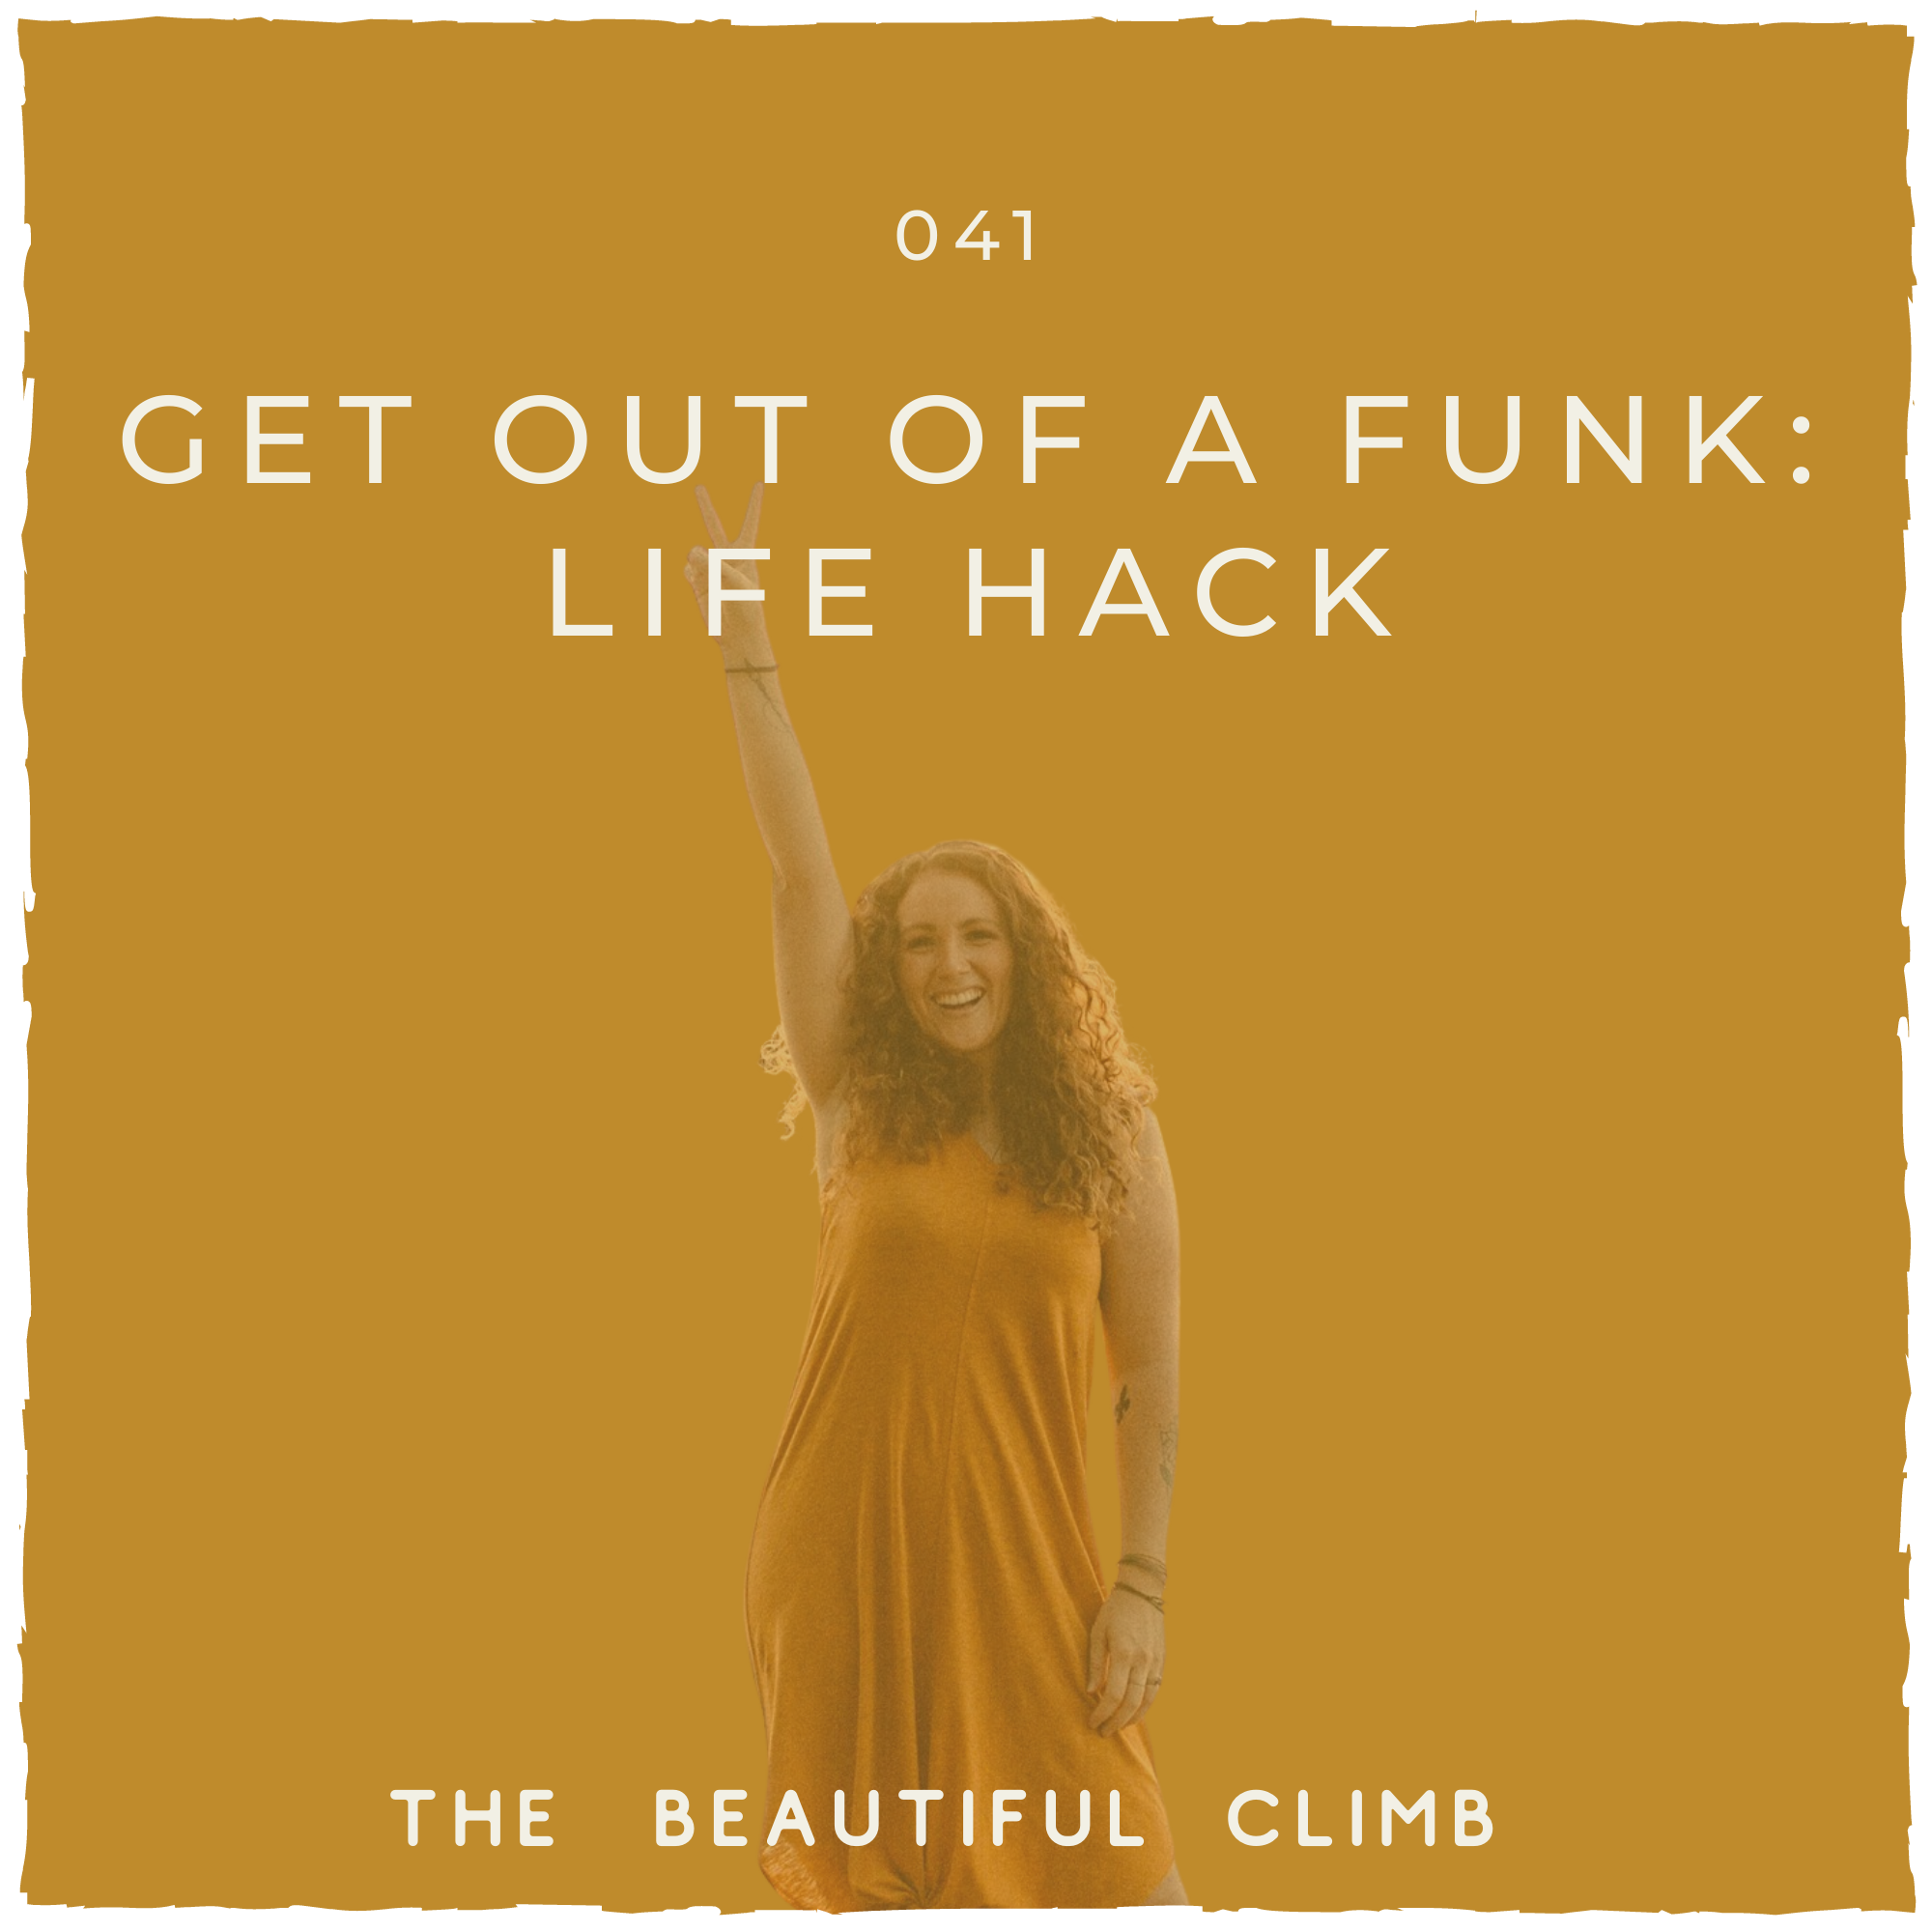 get out of a funk: life hack